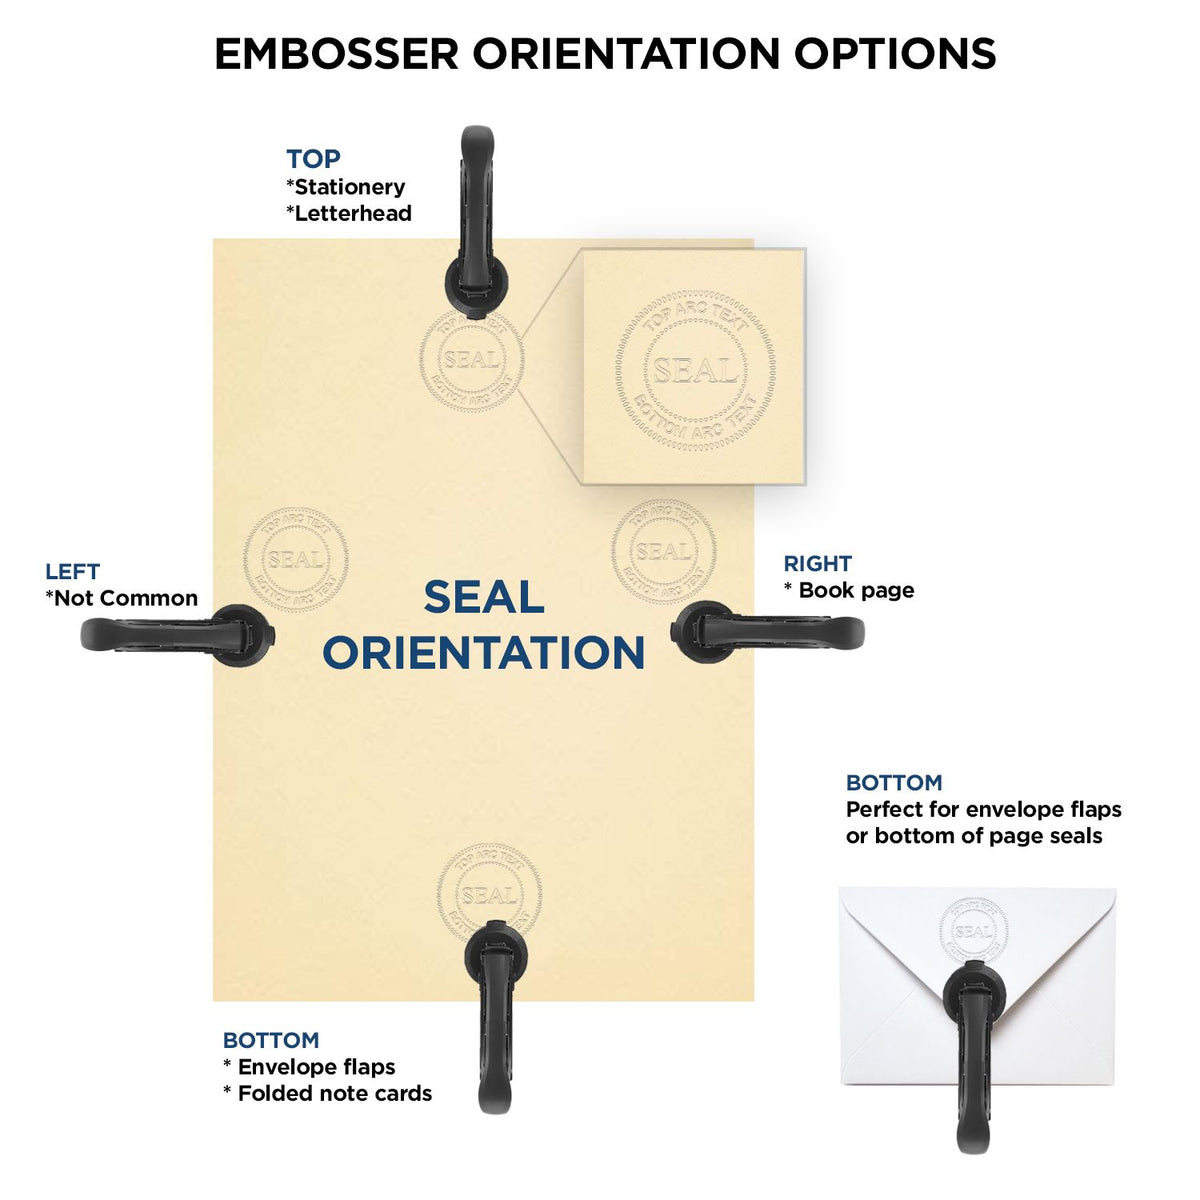 An infographic for the Heavy Duty Cast Iron Ohio Engineer Seal Embosser showing embosser orientation, this is showing examples of a top, bottom, right and left insert.